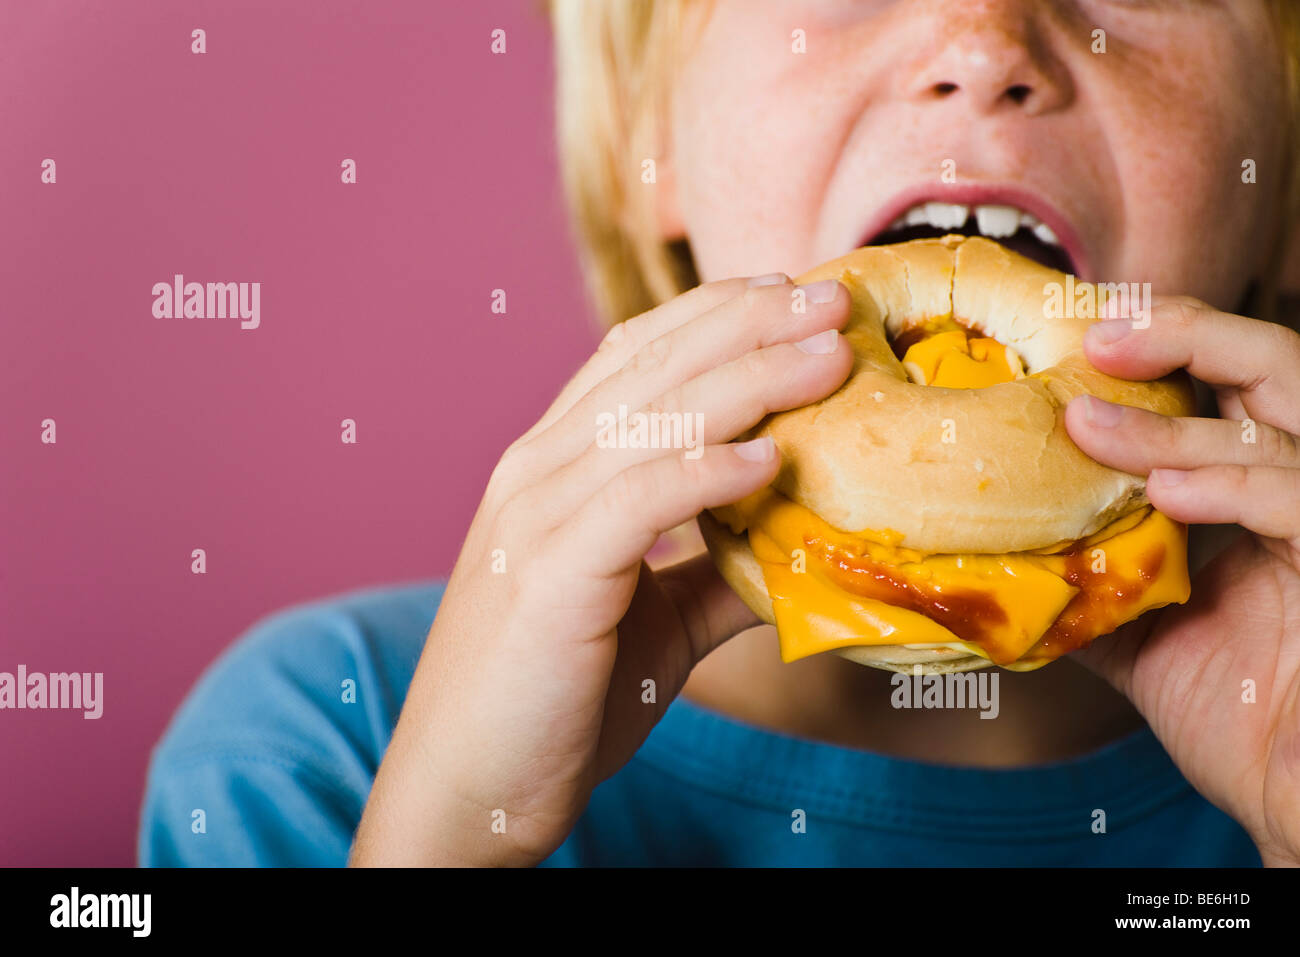 Boy eating bagel and cheese sandwich, cropped Stock Photo